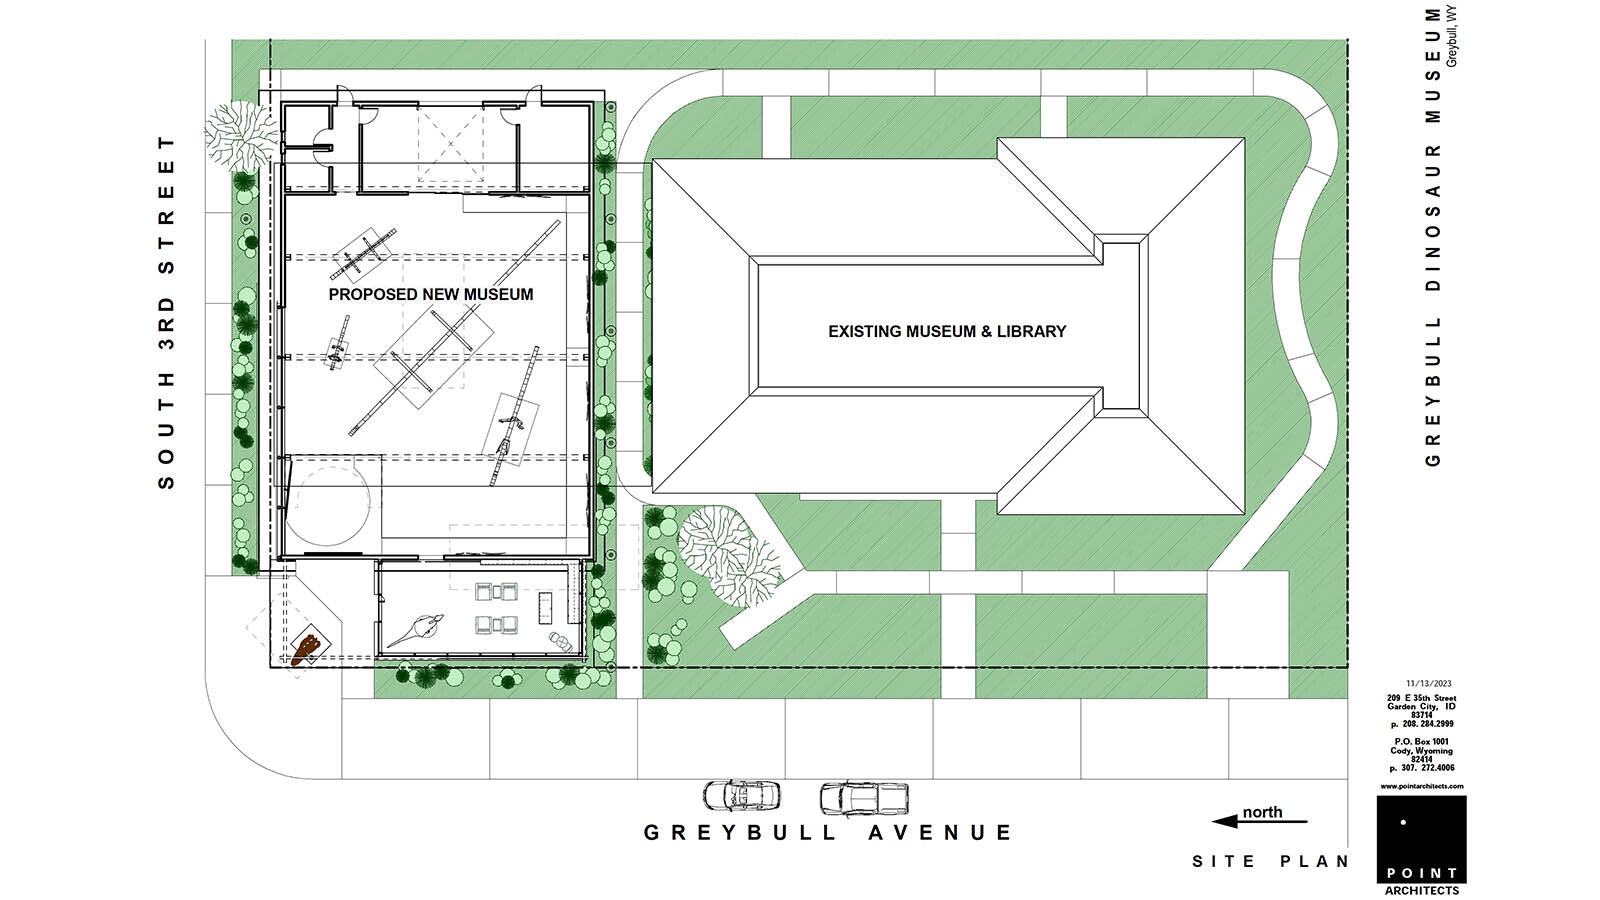 Location and layout of a planned new dinosaur museum in Greybull.